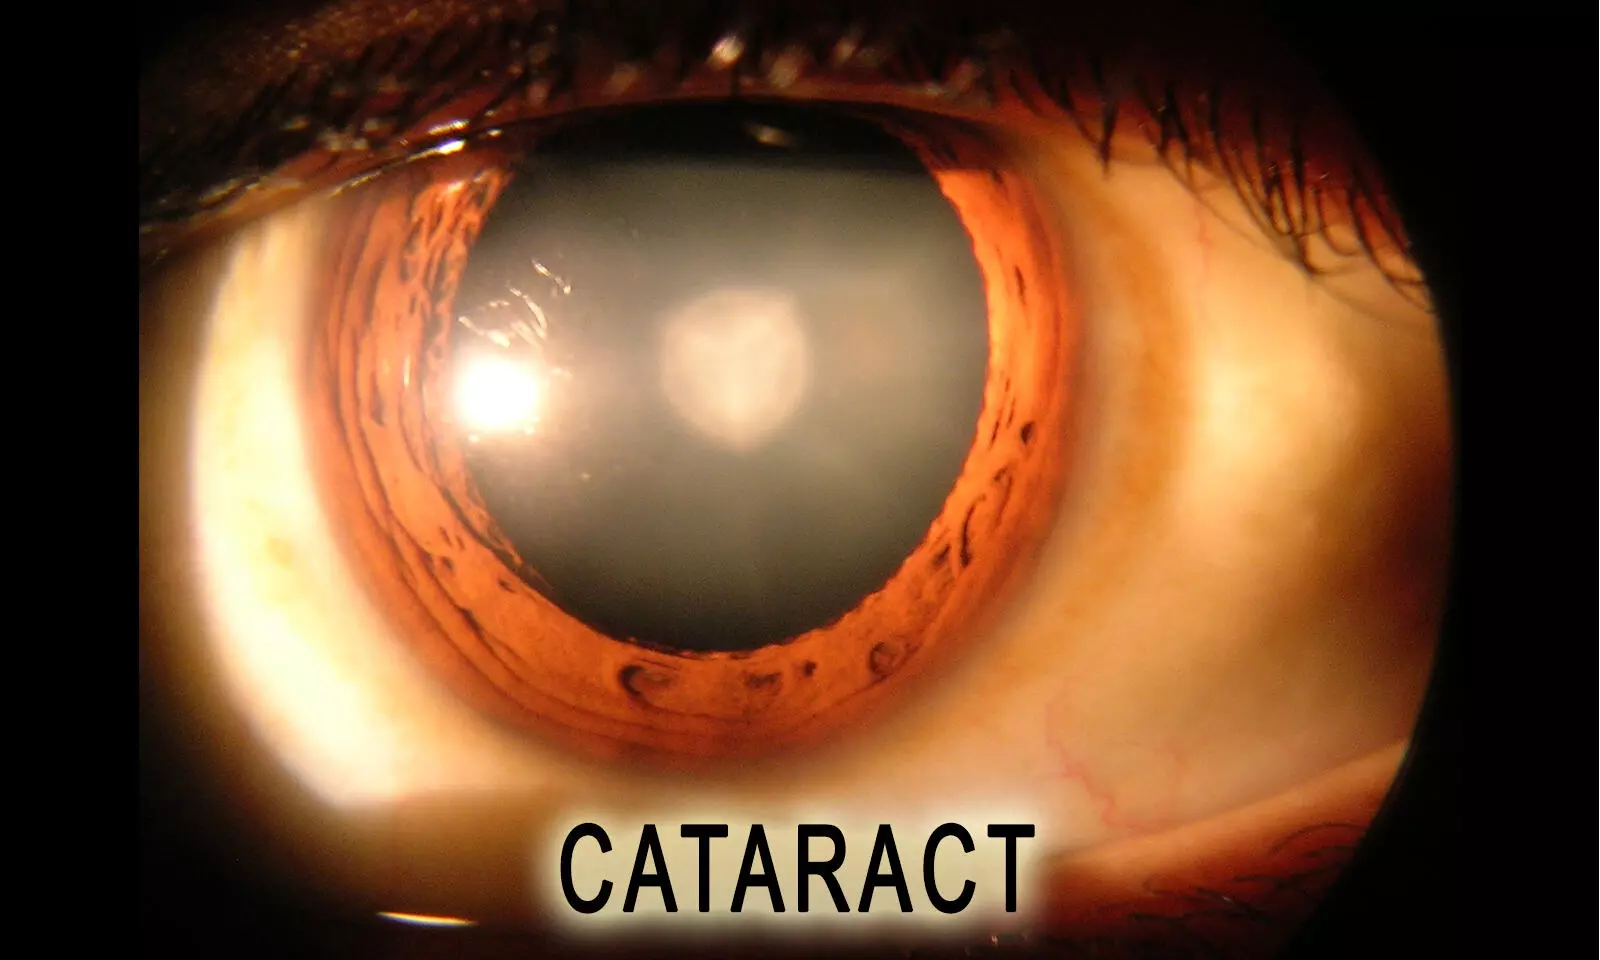 Systemic drugs closely associated with cataract development